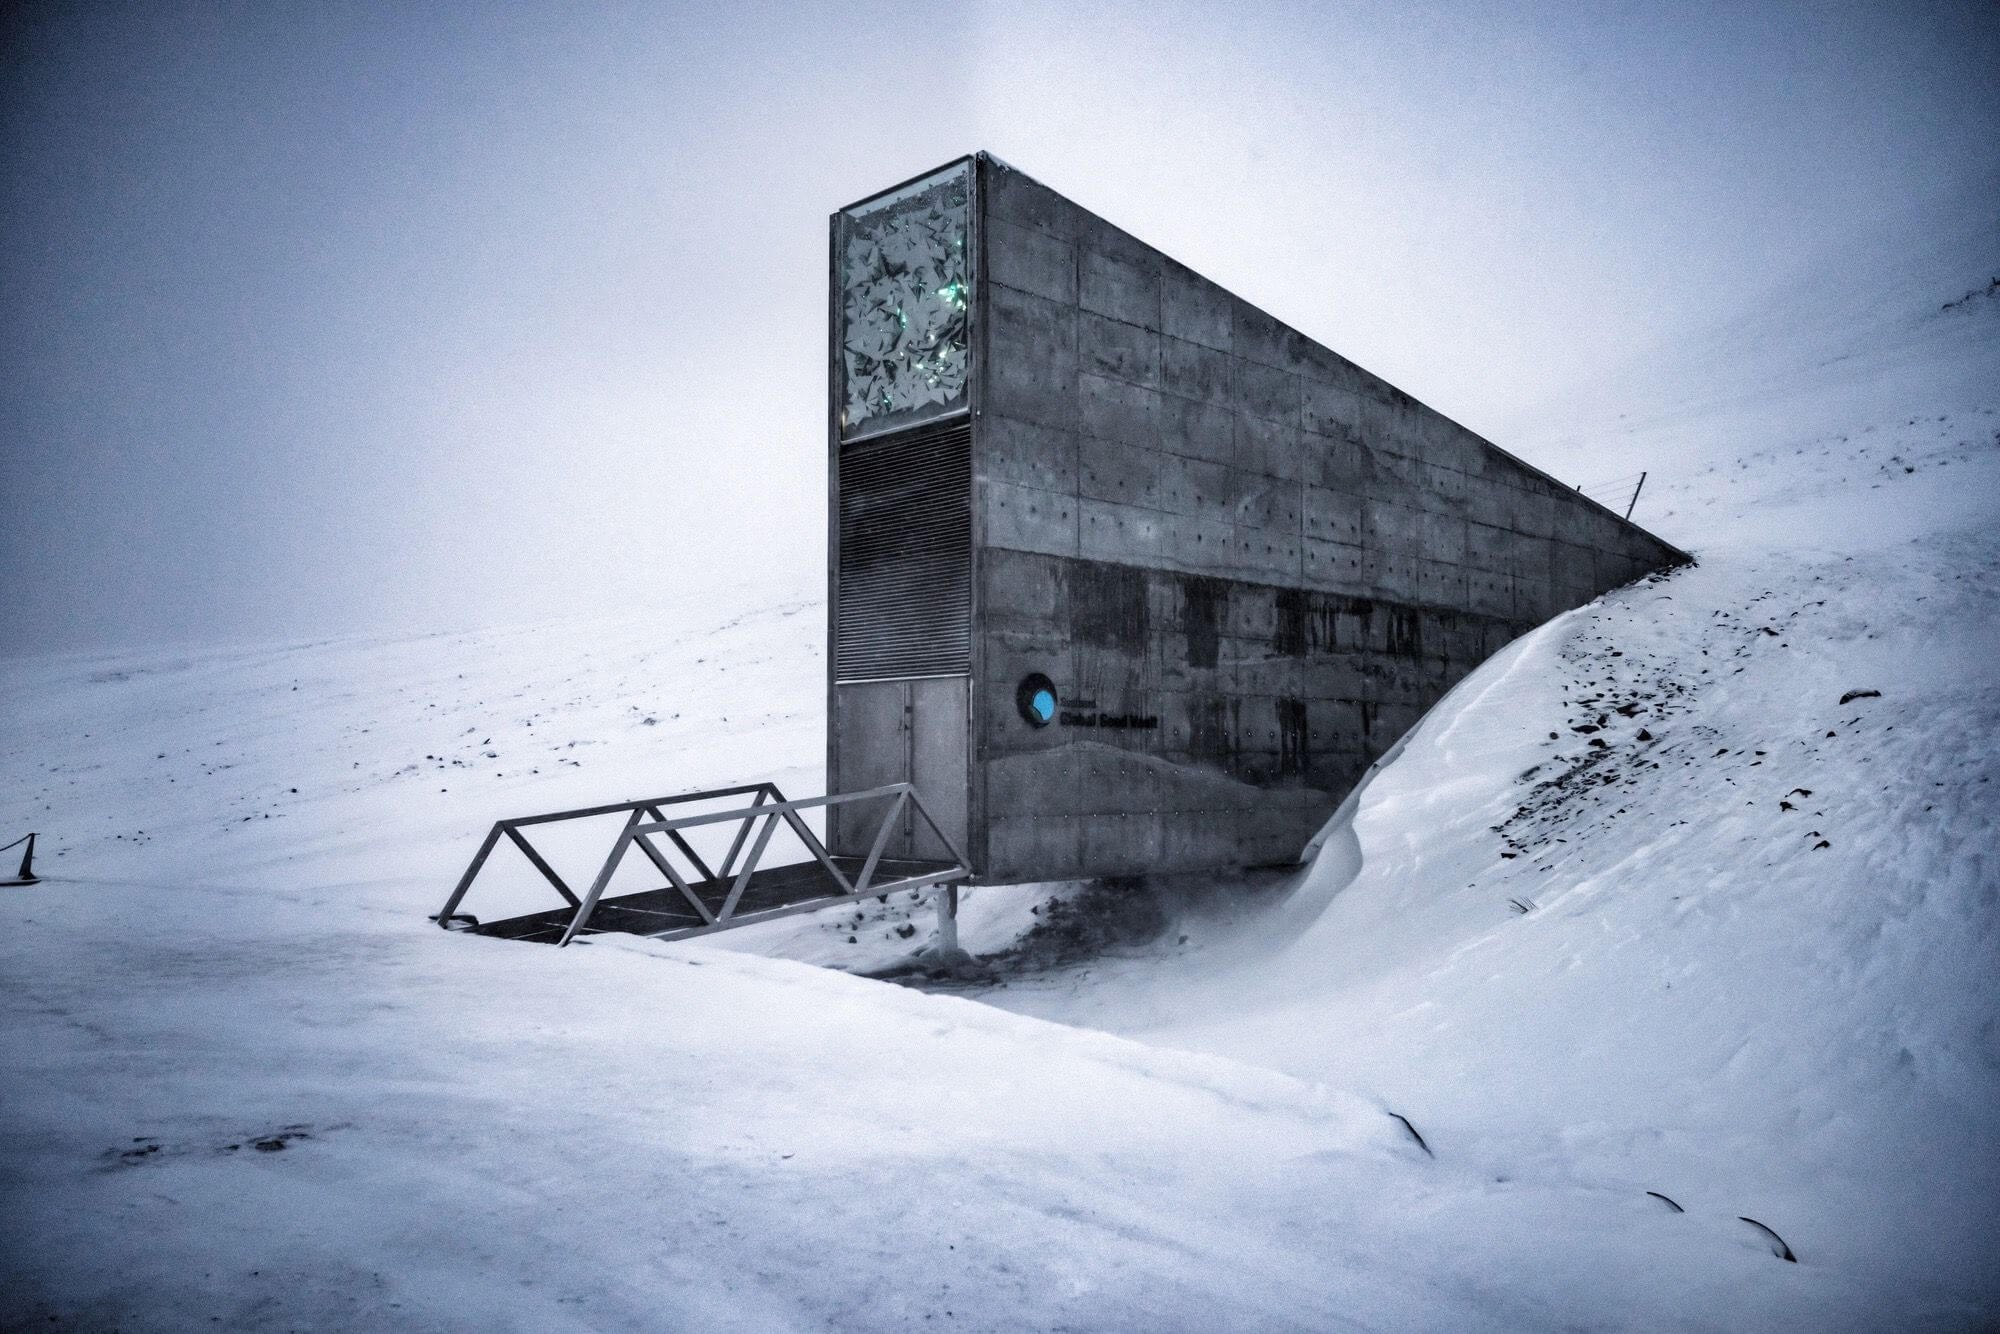 Latvia will deposit 153 seed samples of plant genetic resources for food and agriculture into the Svalbard Global Seed Vault